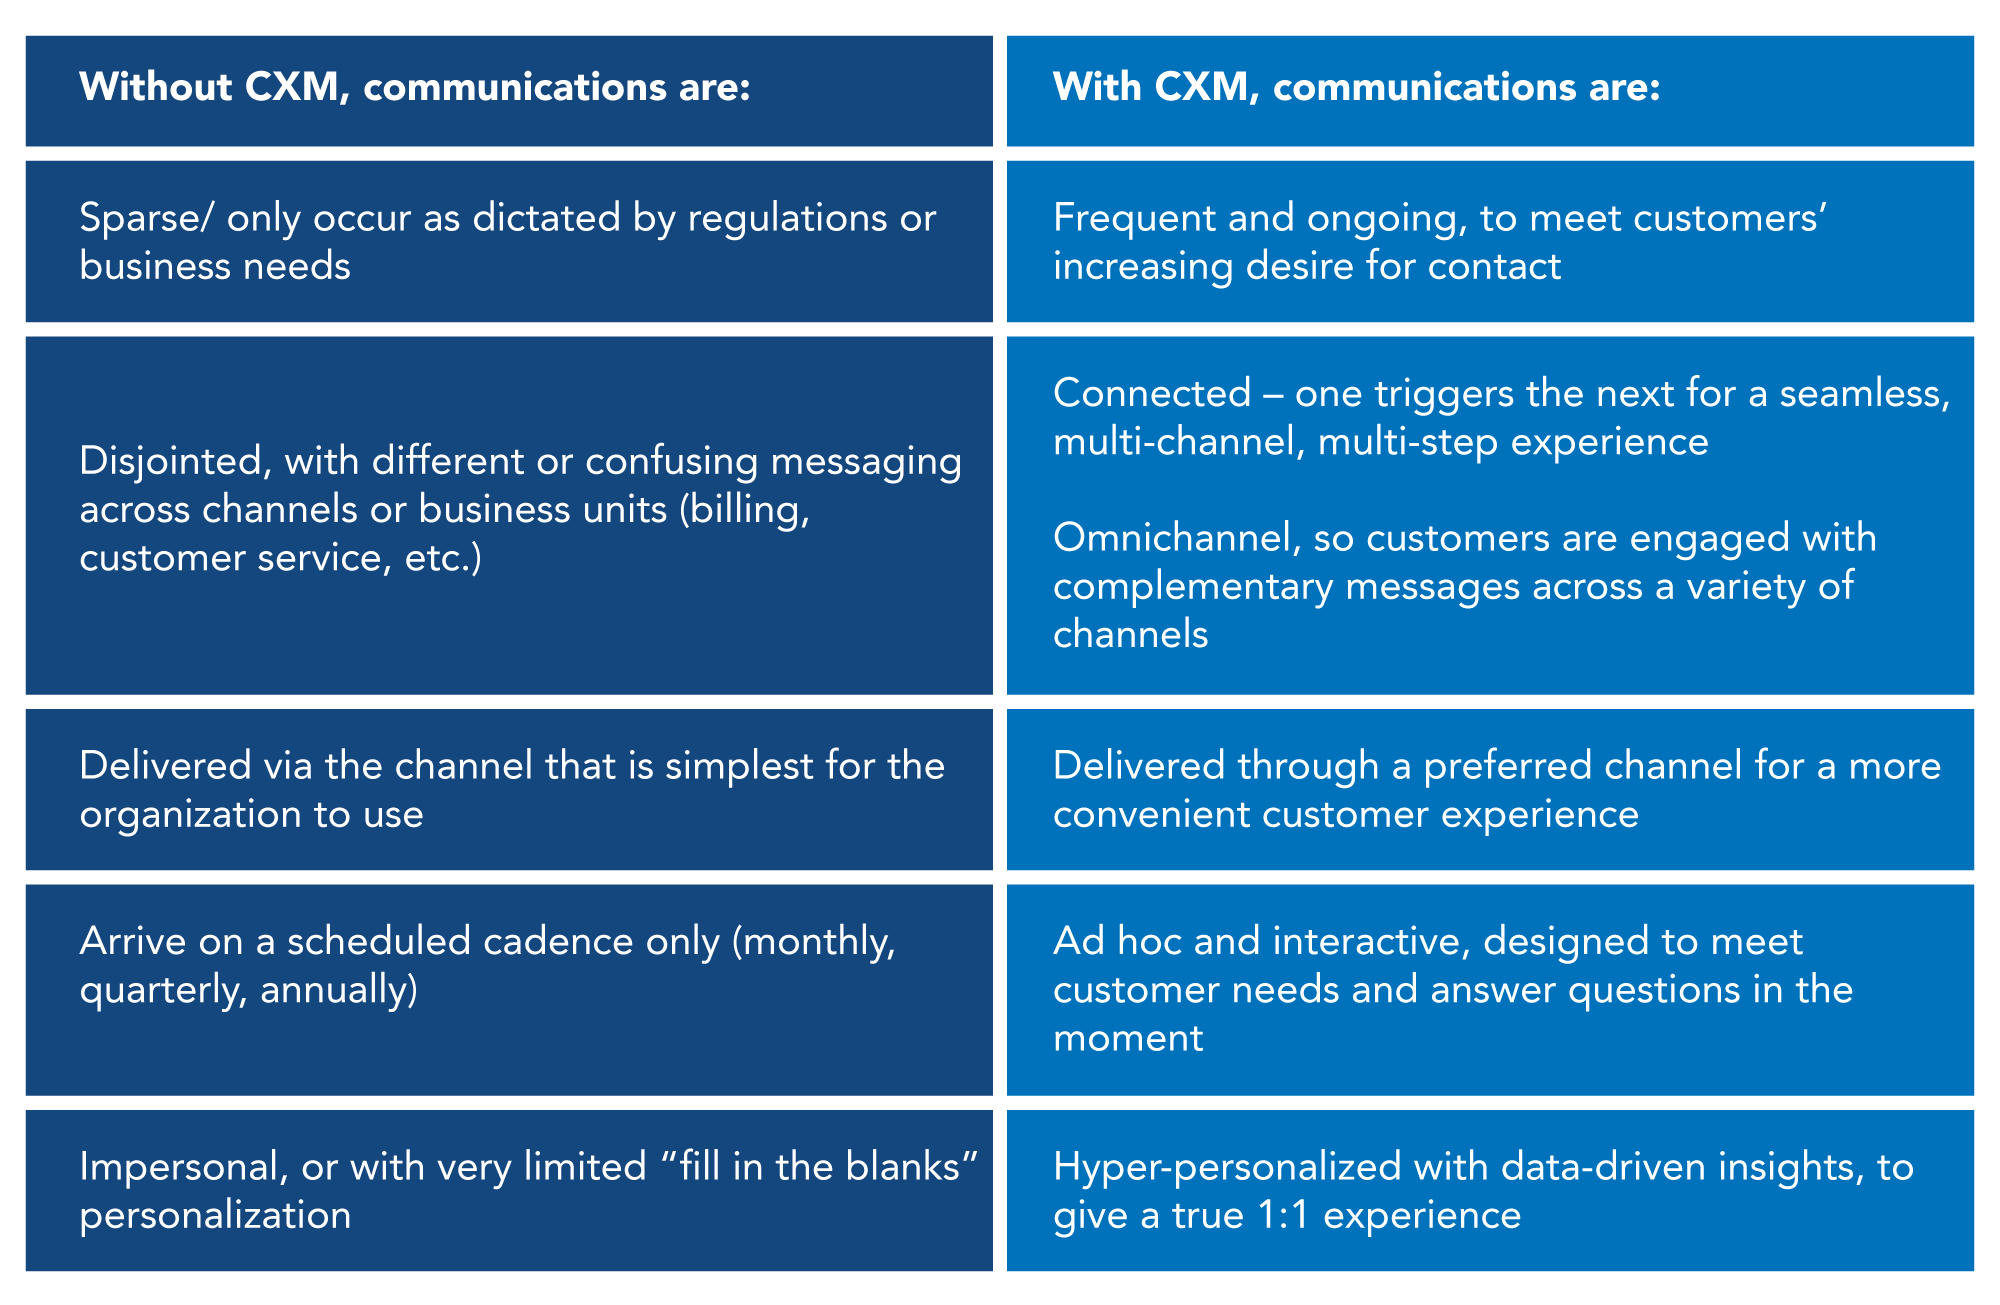 Without CXM, communications are: Sparse/ only occur as dictated by regulations or business needs/Disjointed, with different or confusing messaging across channels or business units (billing, customer service, etc.)/Delivered via the channel that is simplest for the organization to use/Arrive on a scheduled cadence only (monthly, quarterly, annually)/Impersonal, or with very limited “fill in the blanks” personalization. With CXM, communications are: Frequent and ongoing, to meet customers’ increasing desire for contact/Connected – one triggers the next for a seamless, multi-channel, multi-step experience Omnichannel, so customers are engaged with complementary messages across a variety of channels /Delivered through a preferred channel for a more convenient customer experience/Ad hoc and interactive, designed to meet customer needs and answer questions in the moment/Hyper-personalized with data-driven insights, to give a true 1:1 experience